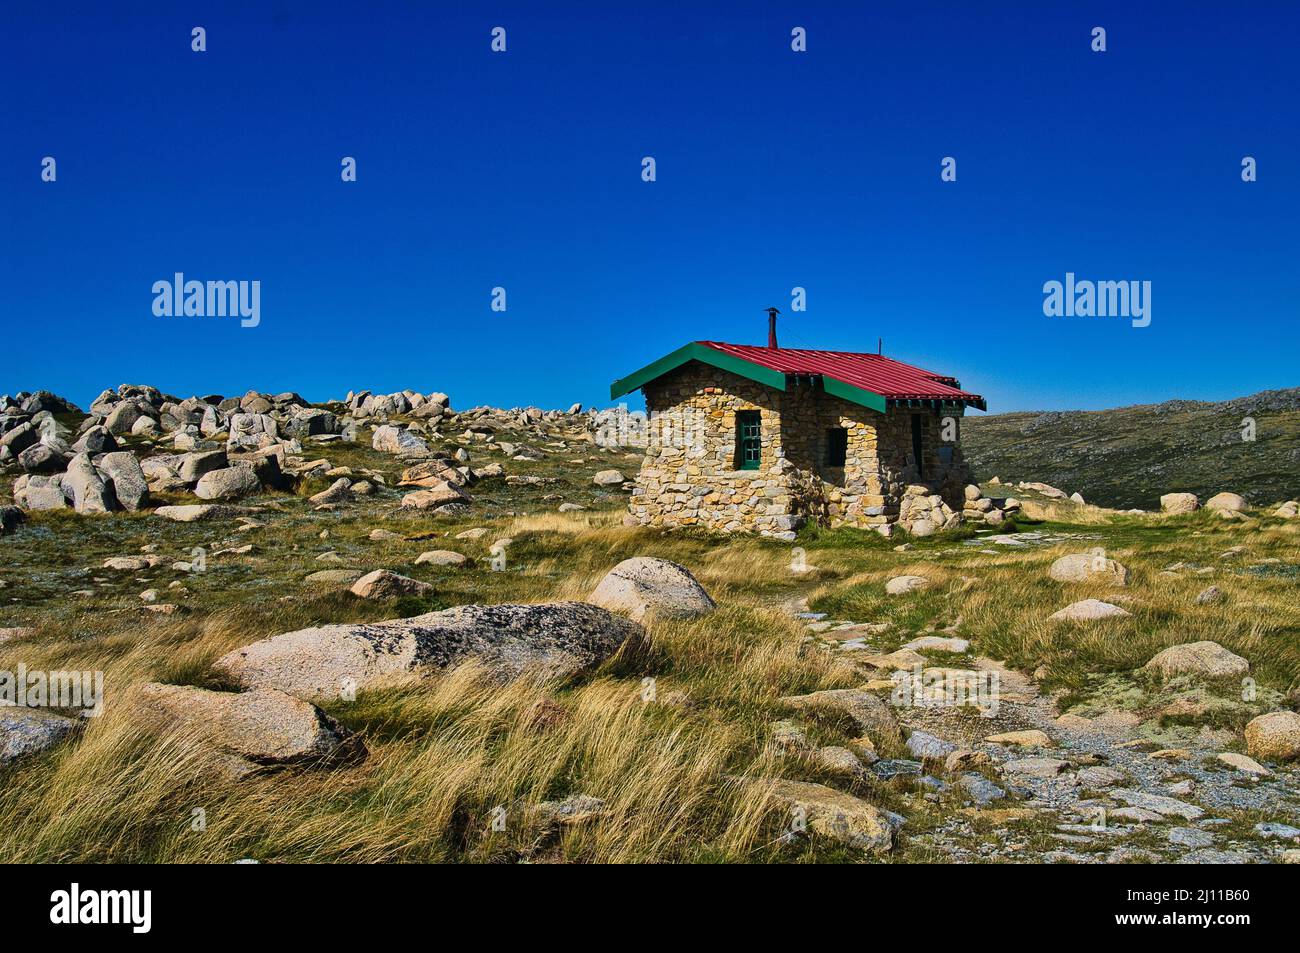 The Seaman’s Hut, a traditional mountain refuge in the mountains of Kosciuszko National Park, New South Wales, Australia Stock Photo